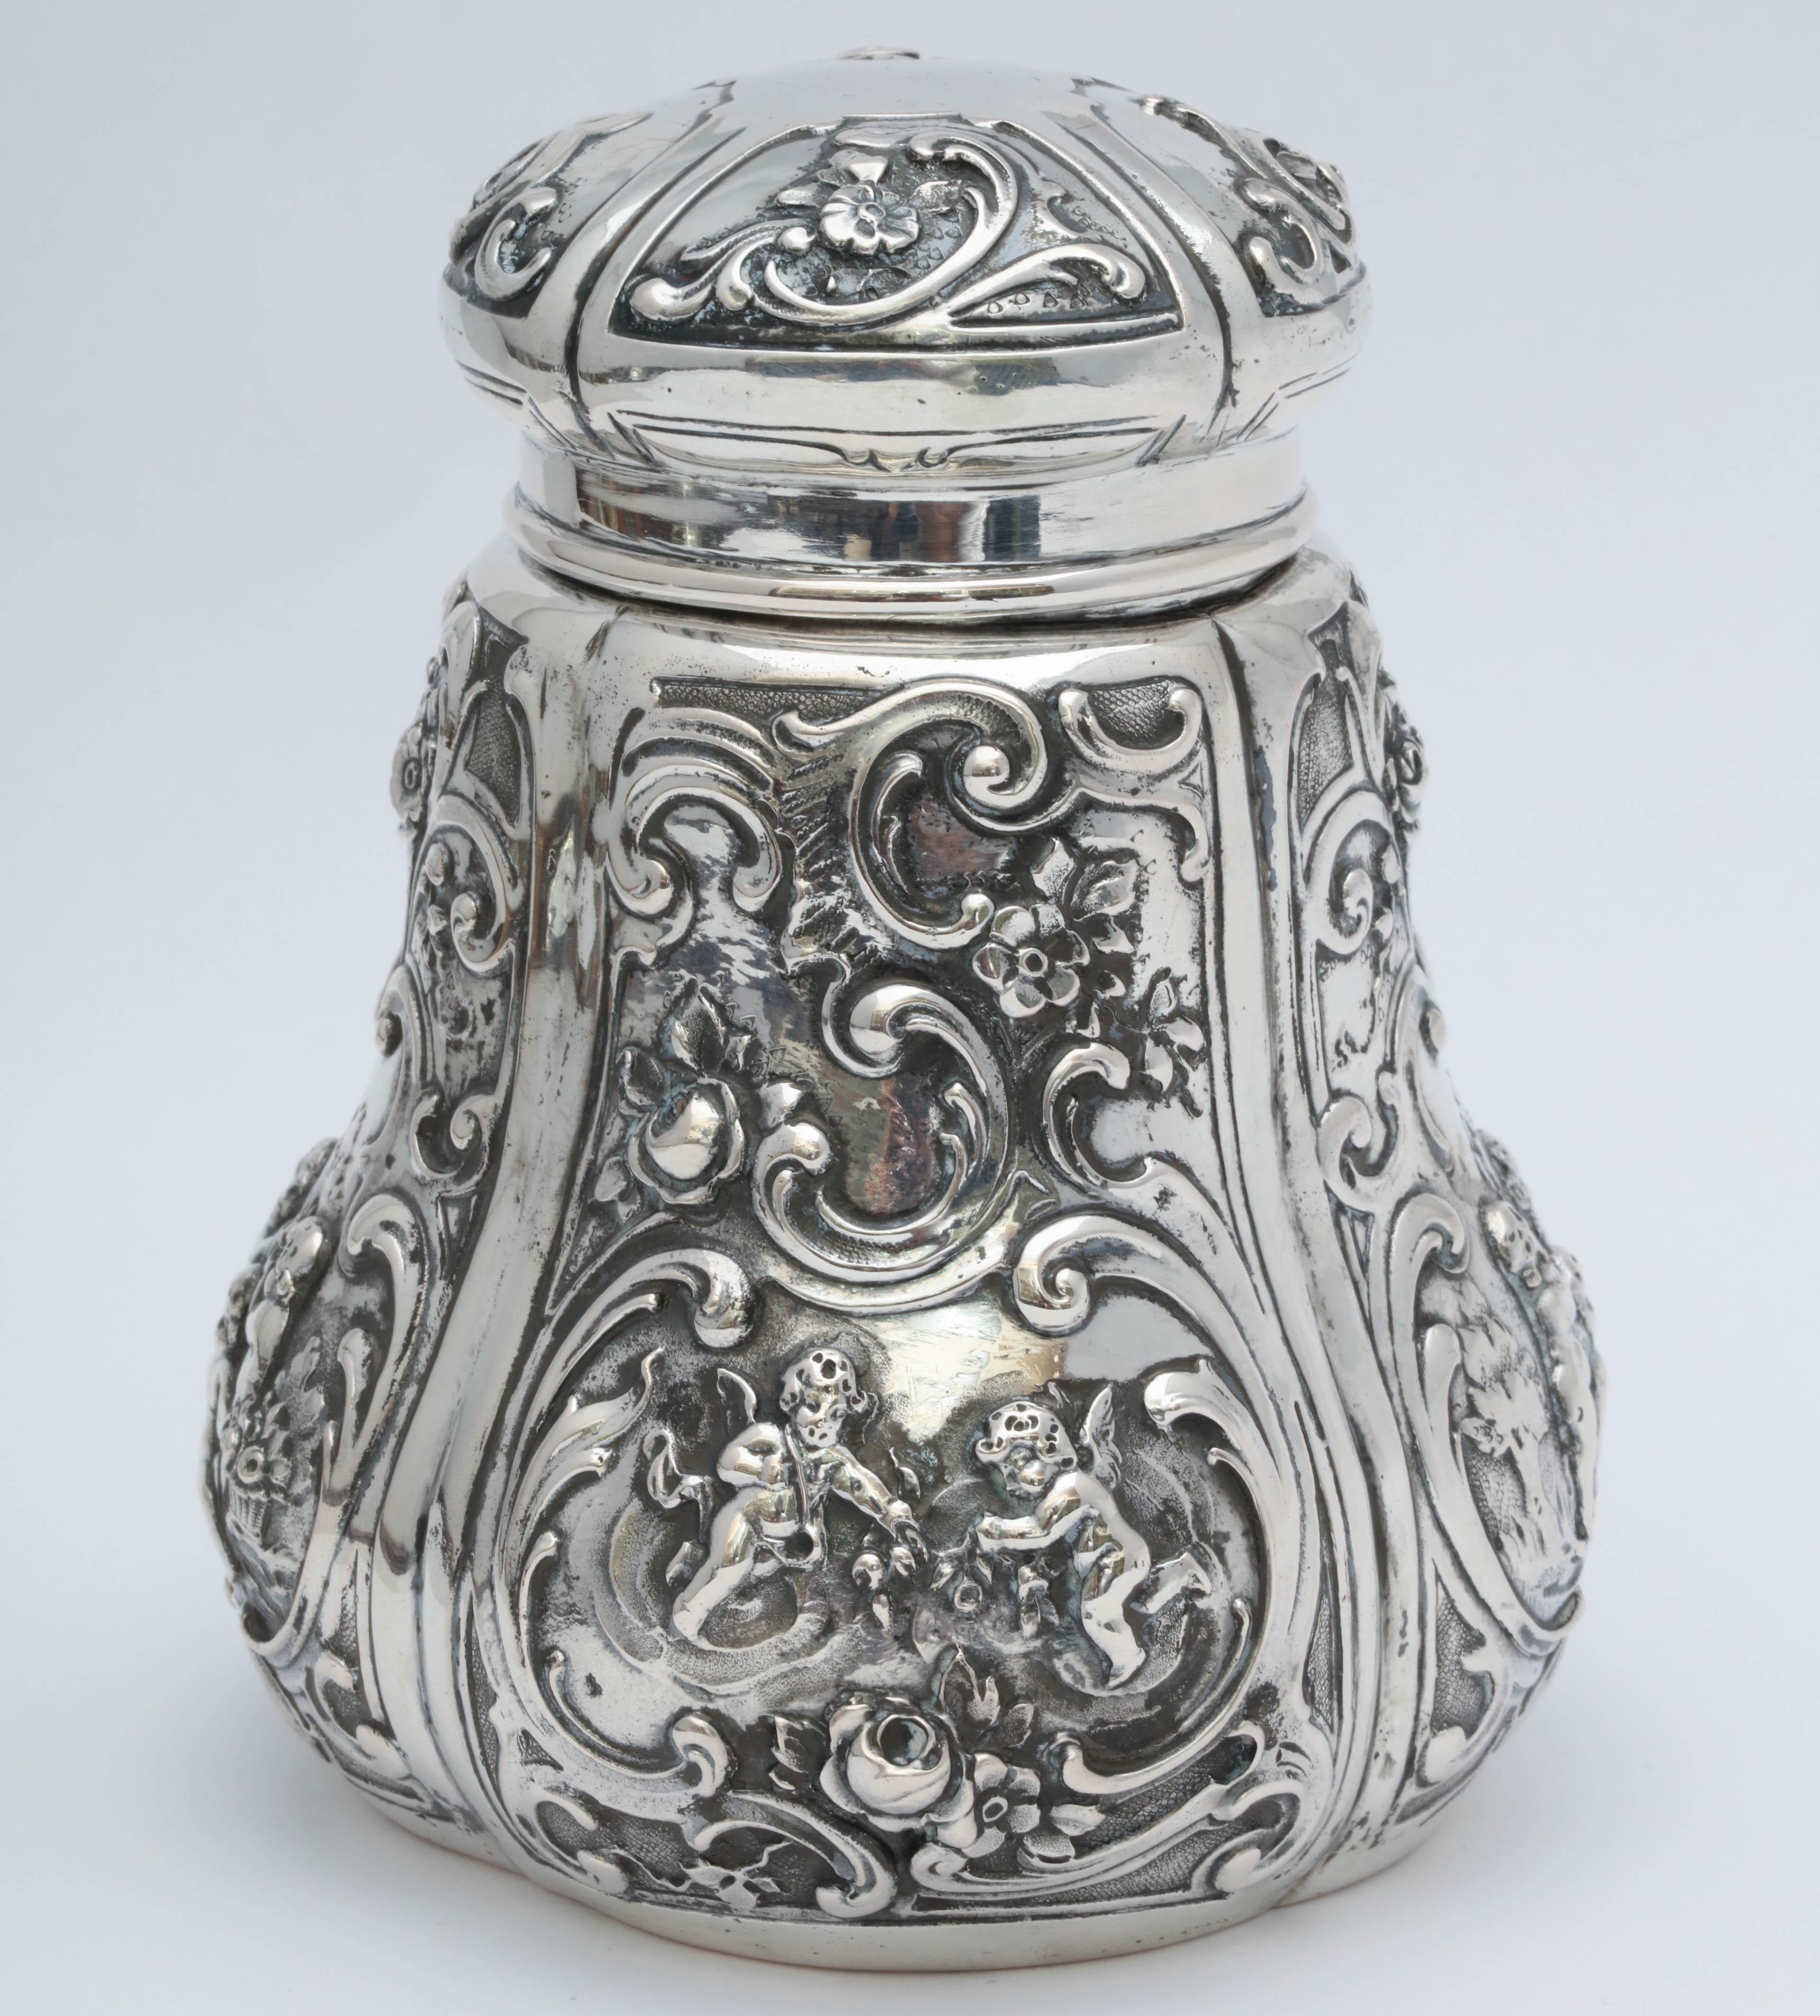 Victorian, Continental silver (.800) tea caddy, Germany, circa 1895. Stands 4 3/4 inches high x 3 1/2 inches in diameter at widest point. Decorated with cherubs and flowers. Weighs 6.510 troy ounces. Dark spots in photos are reflections. Excellent